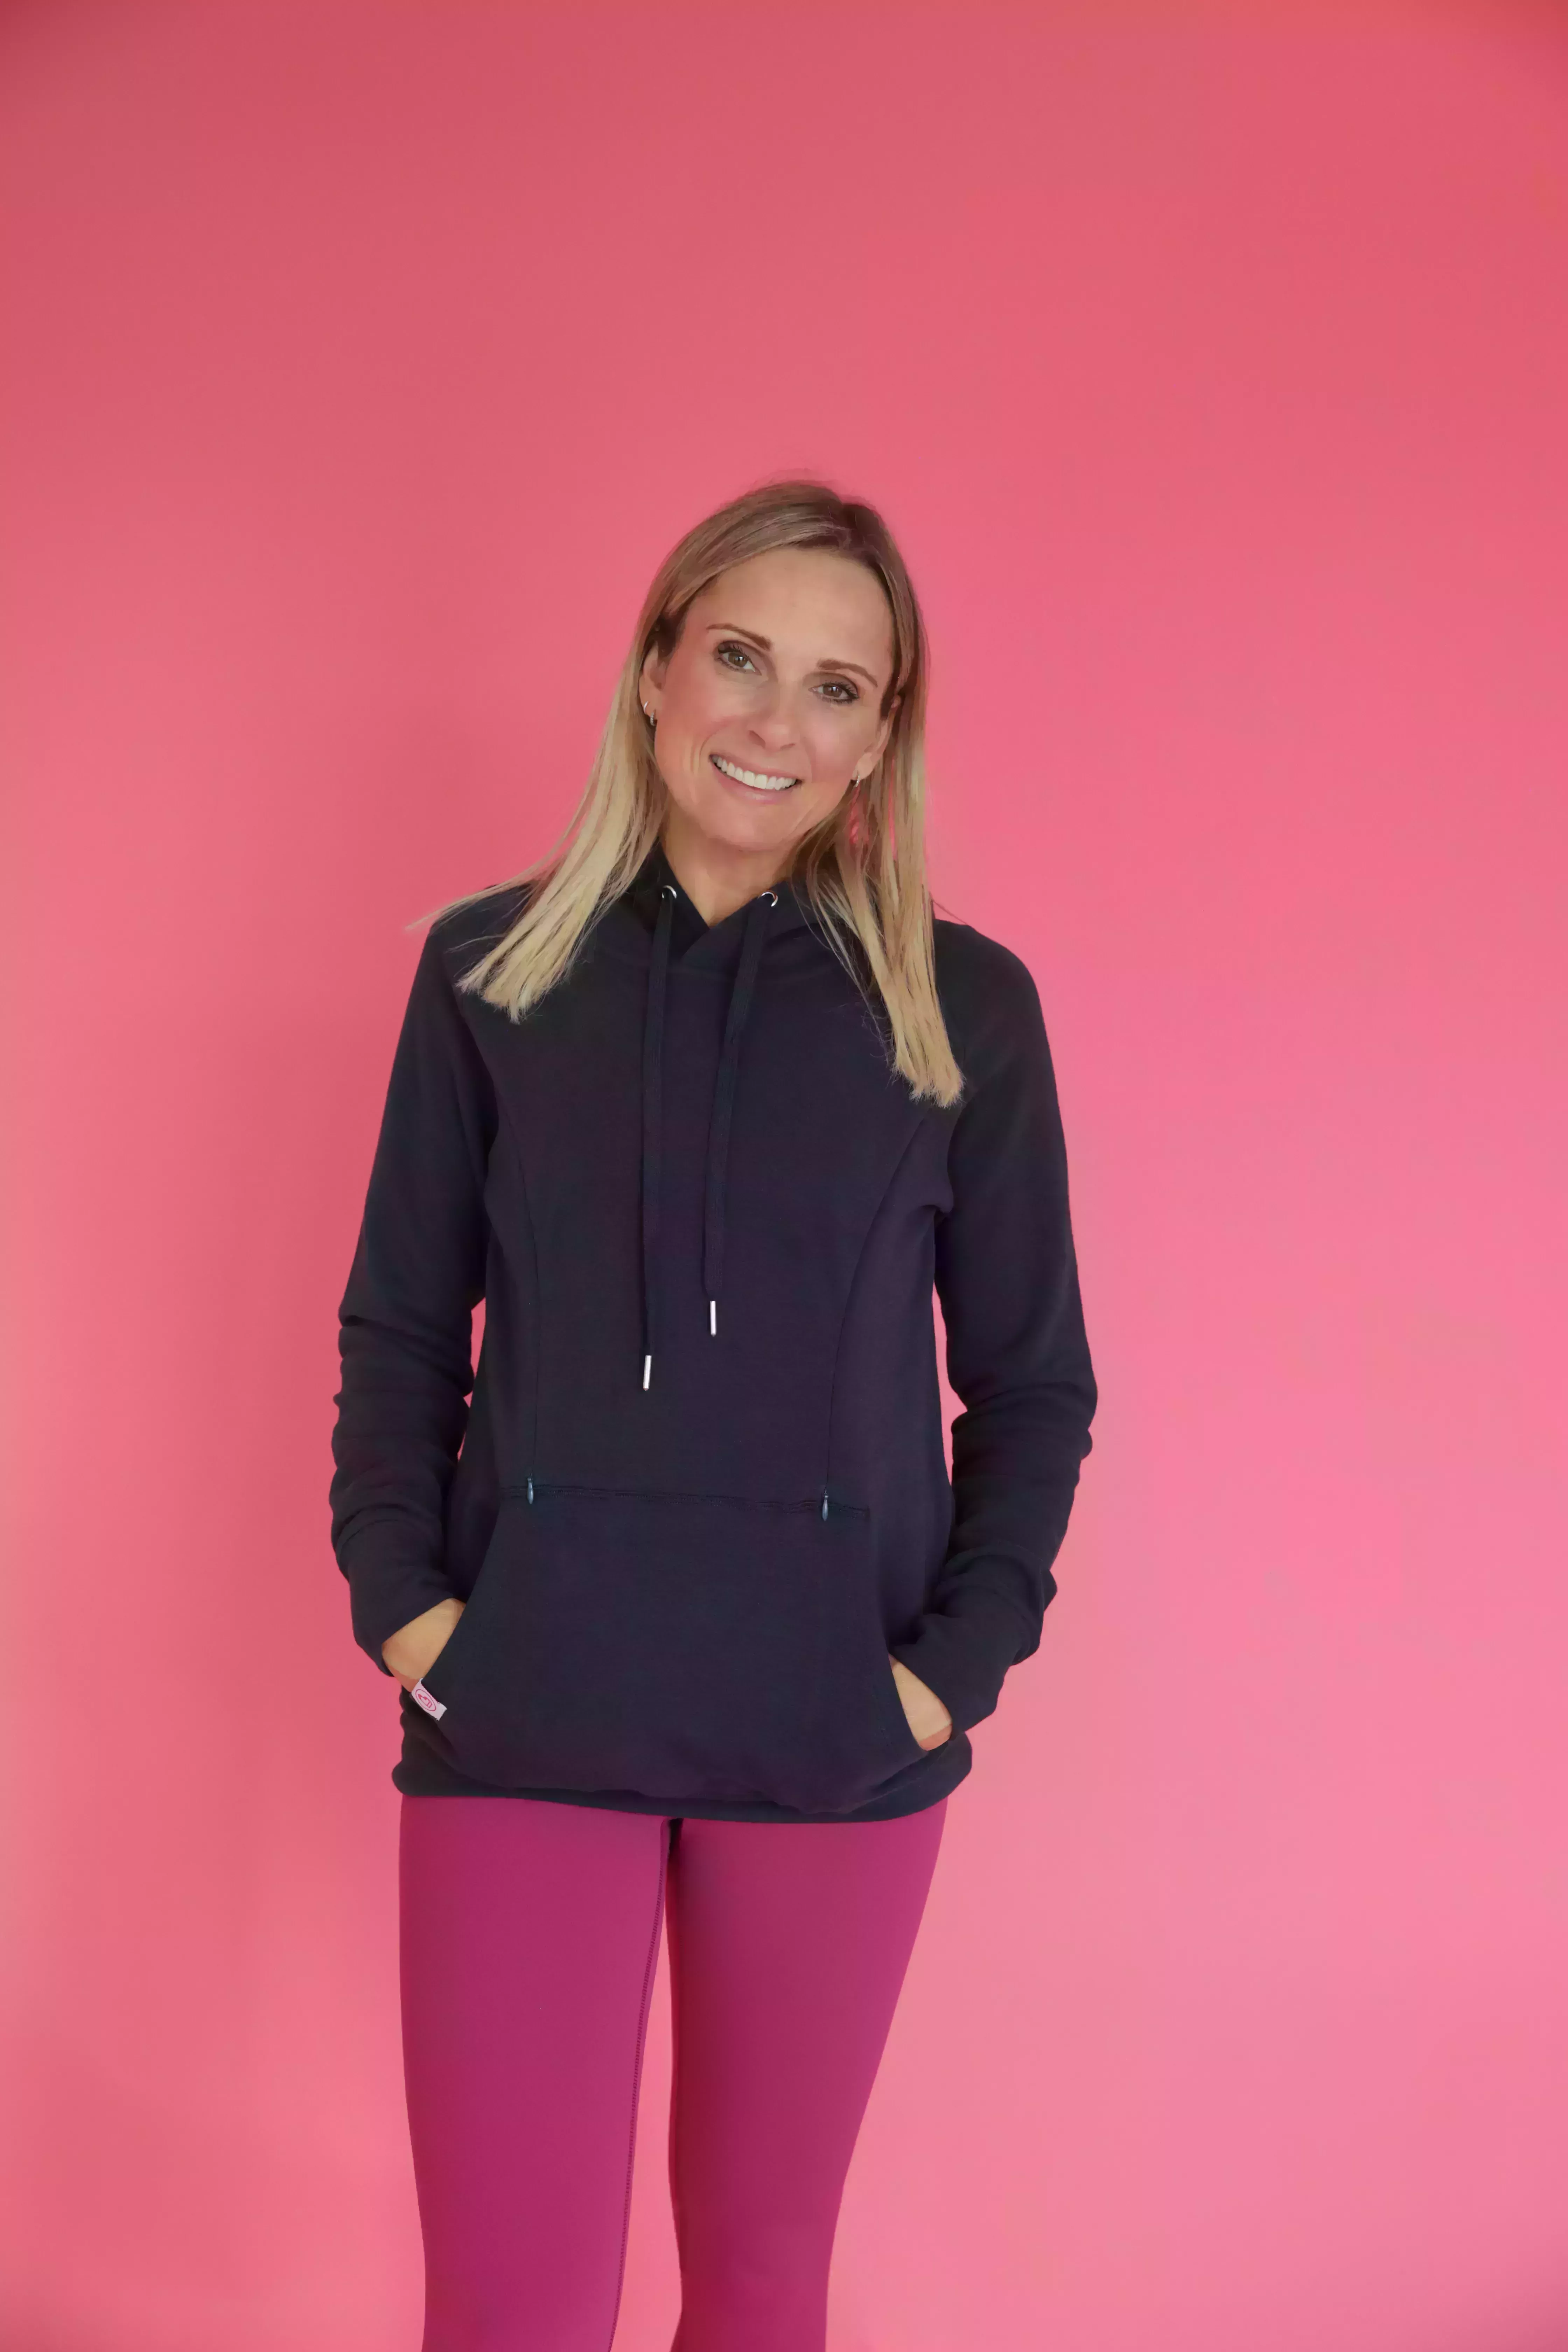 Claire Gleave is the founder of Natal Active